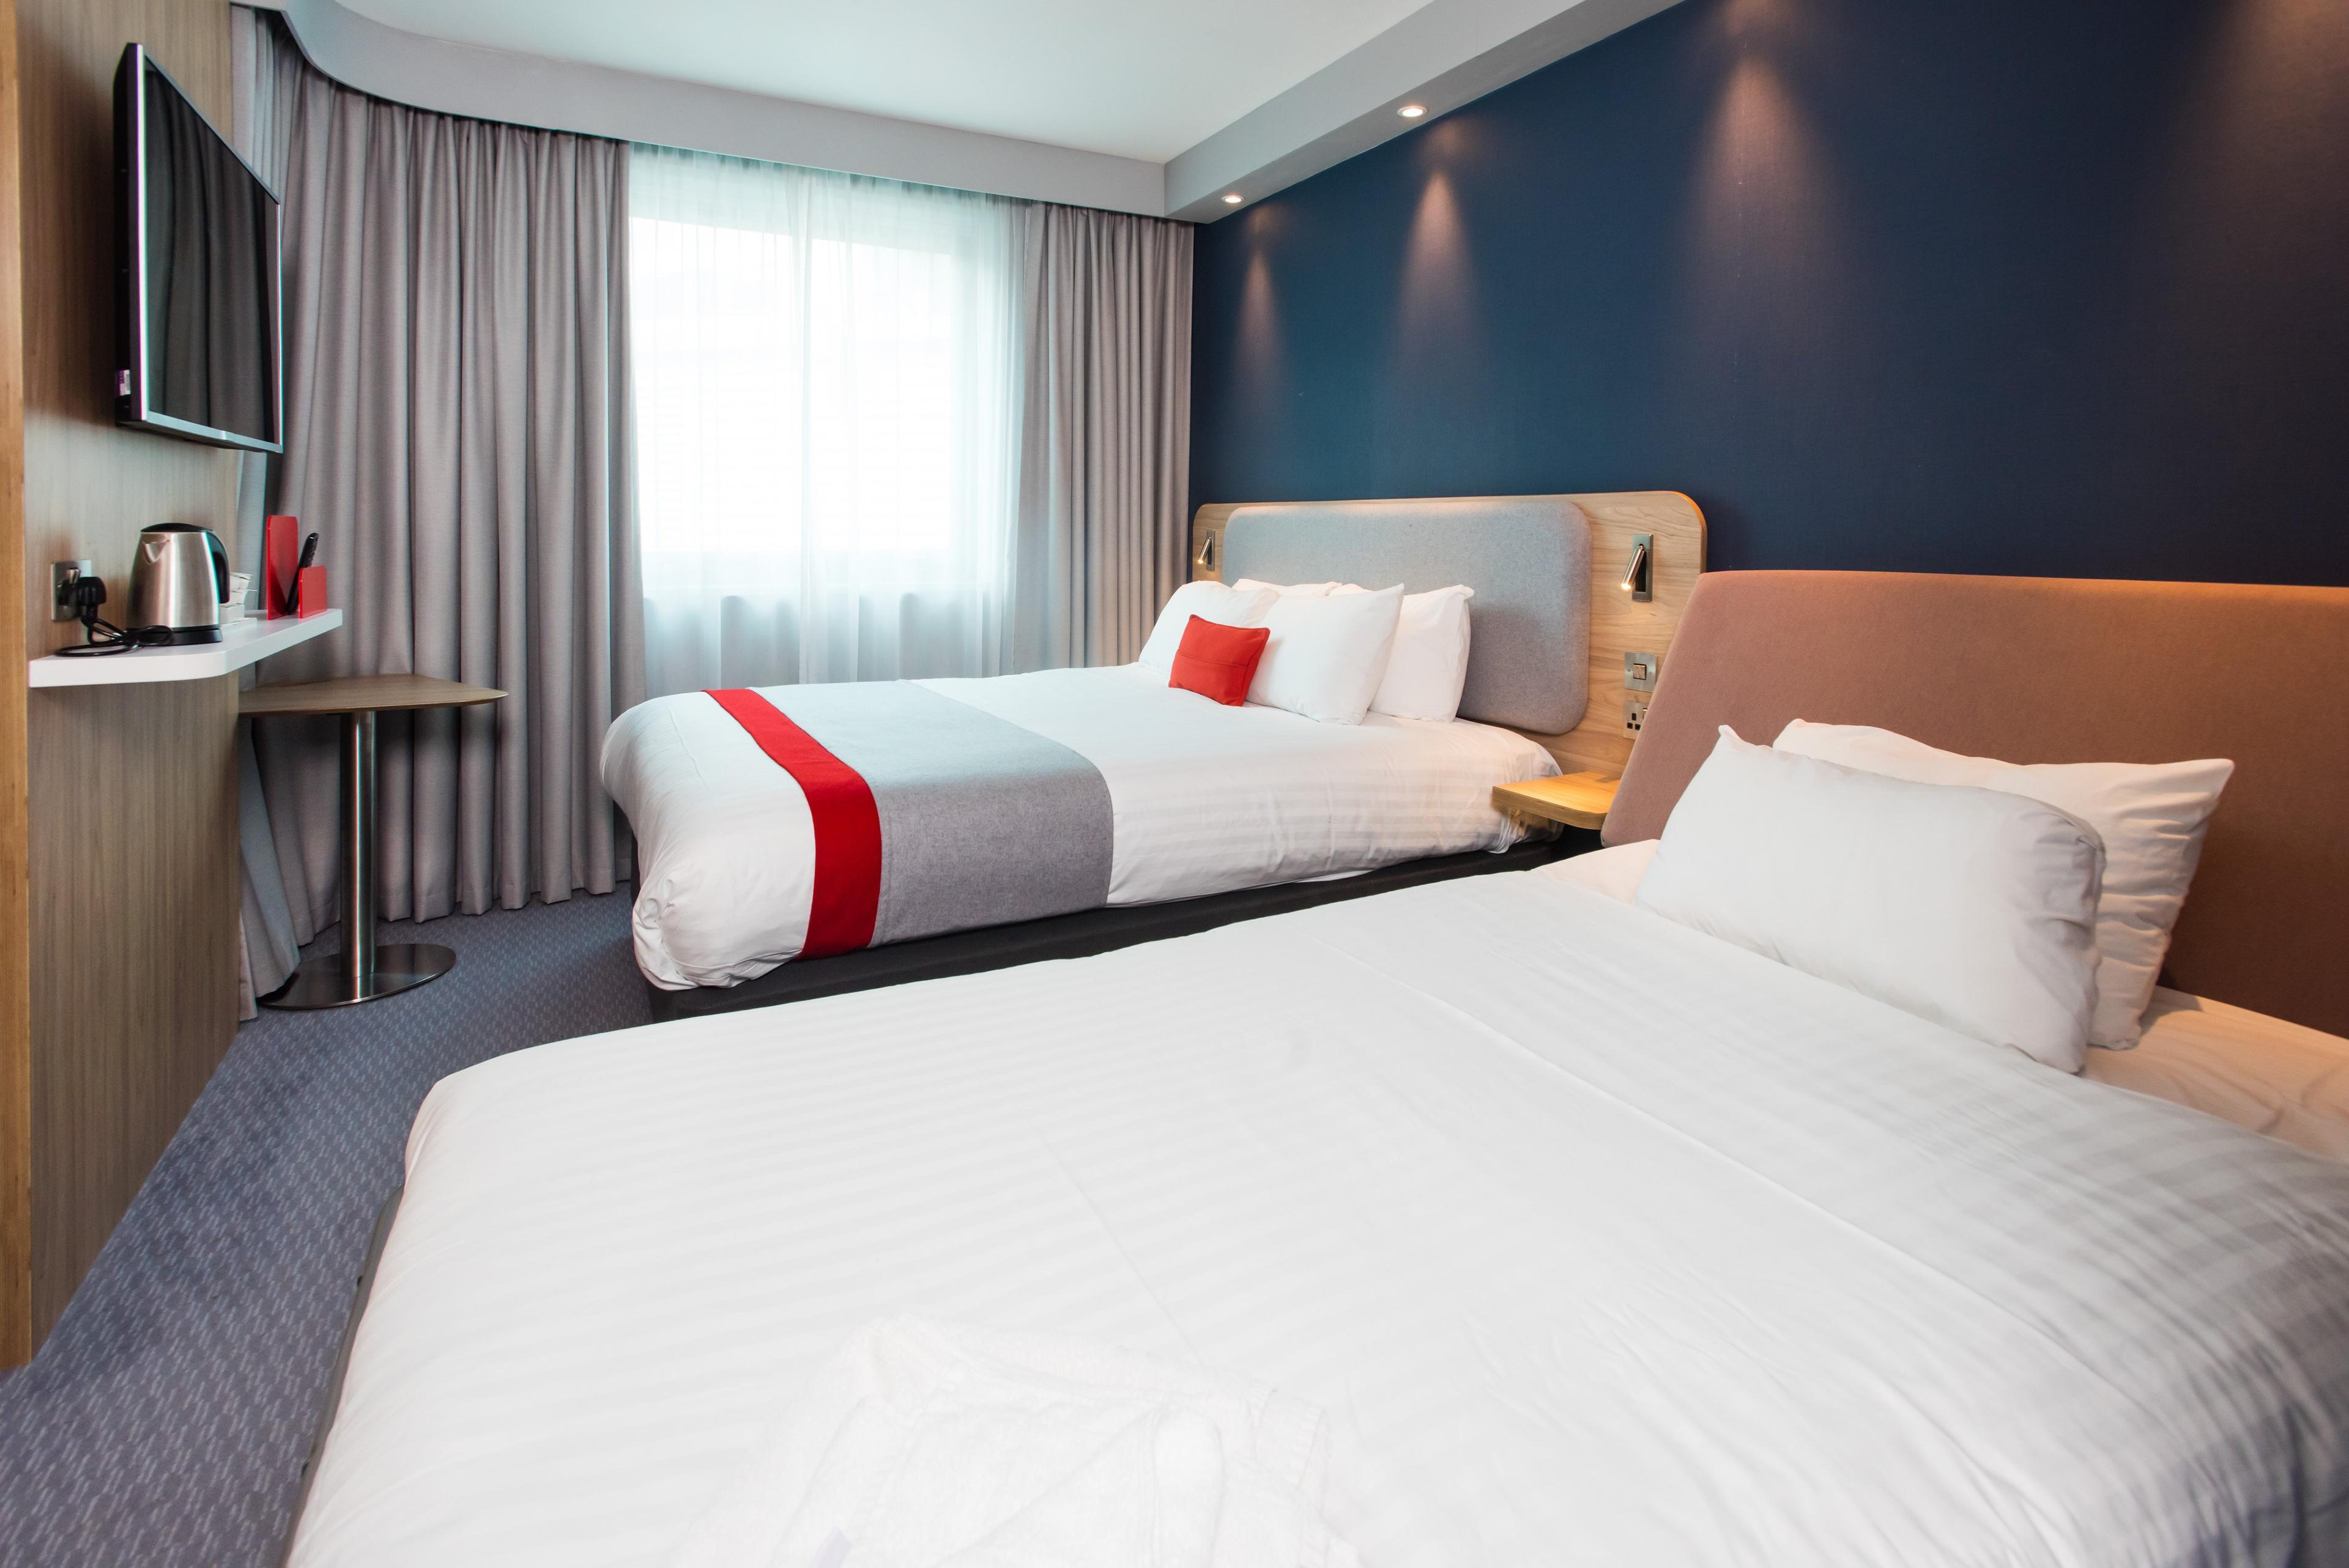 Our family rooms are ideal if you're travelling with kids